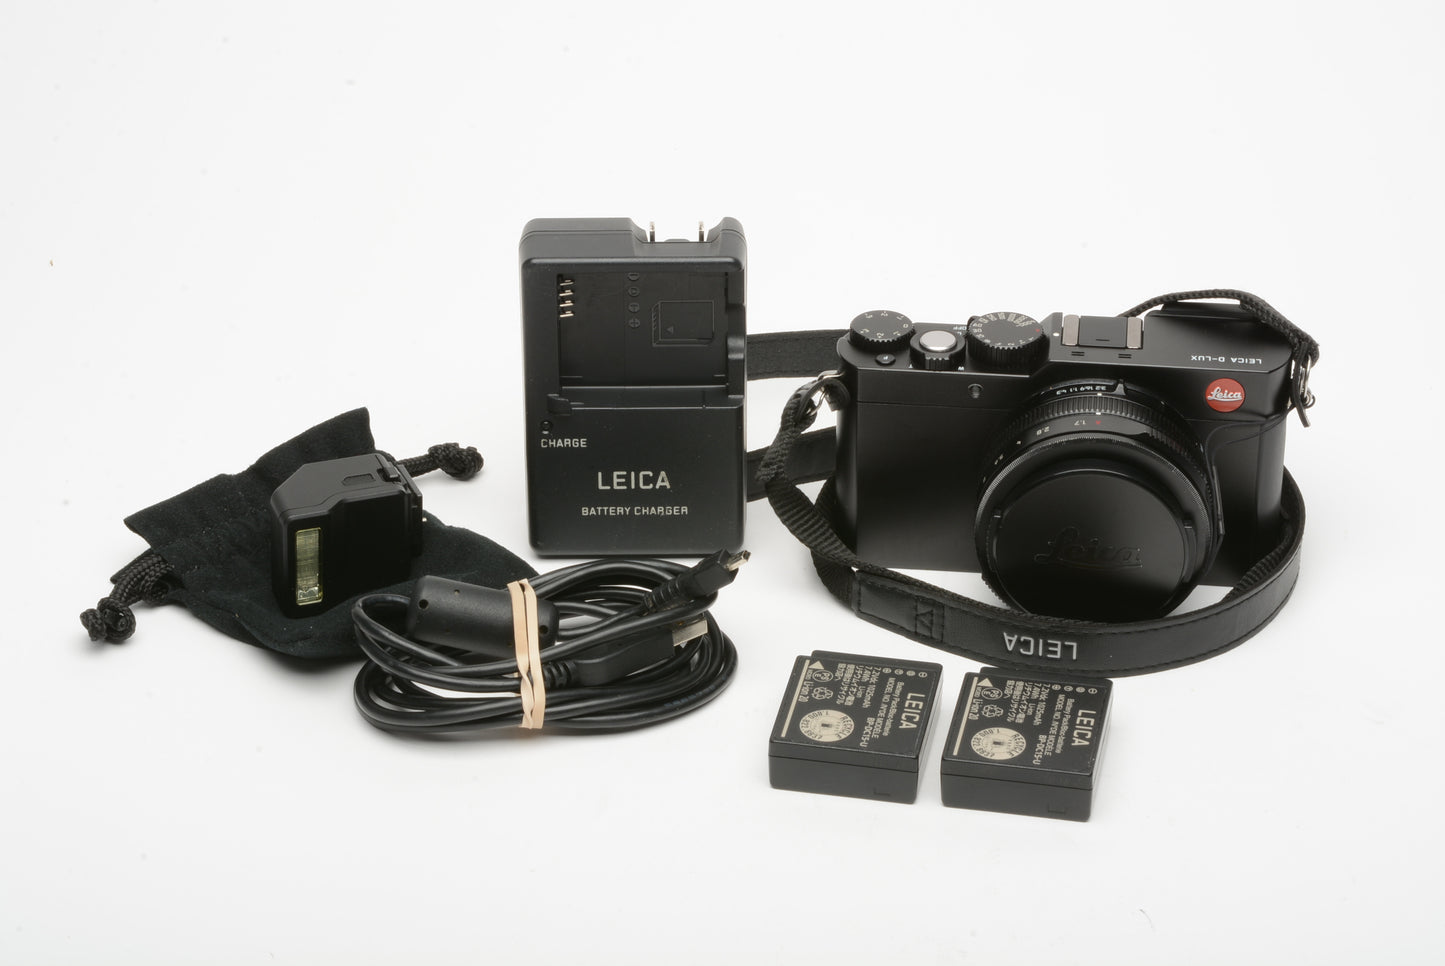 Leica D-Lux typ 109 black, CLA'd by Leica 1/2023, 2batts, charger, flash, great!